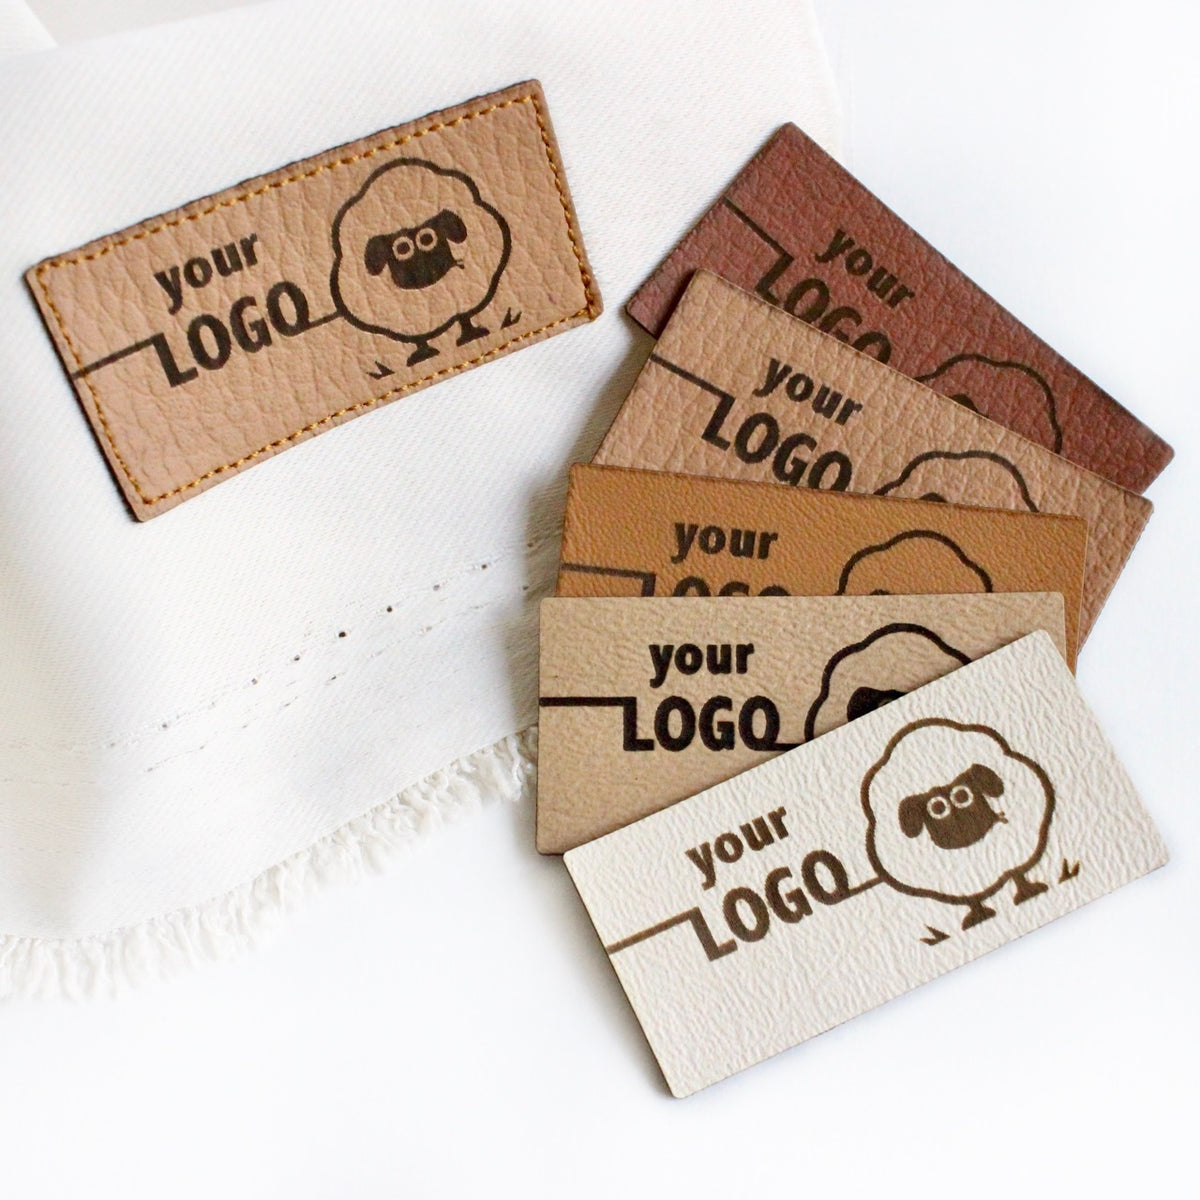 Faux Leather labels for handmade items – Cutpie Studio